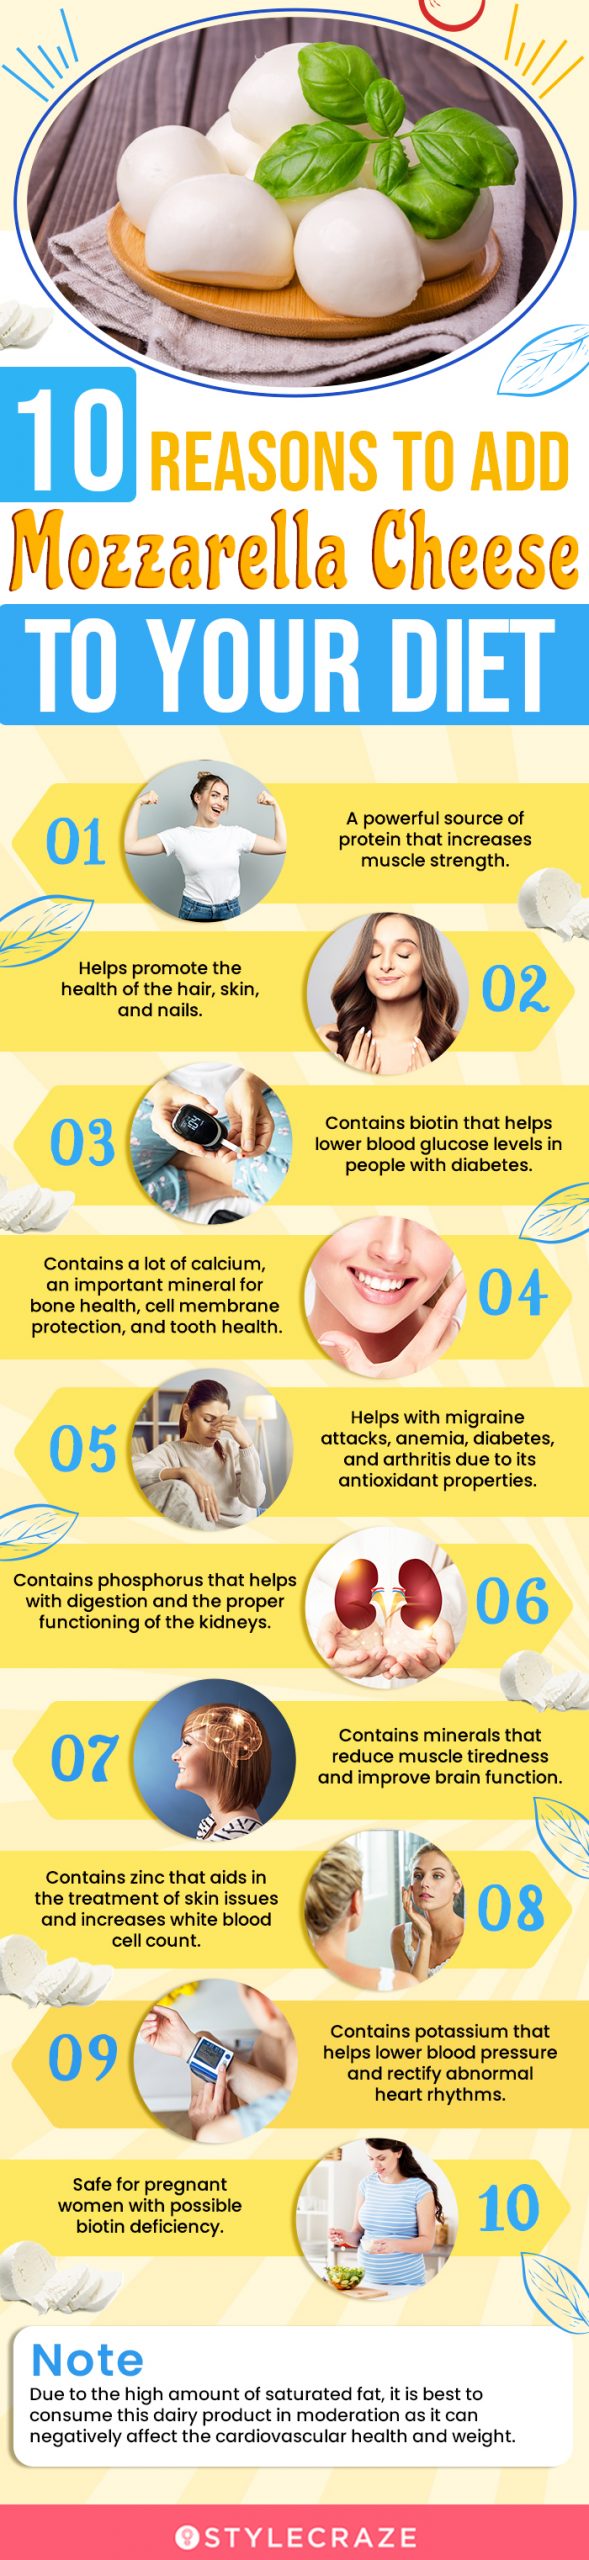 10 reasons to add mozzarella cheese to your diet[infographic]